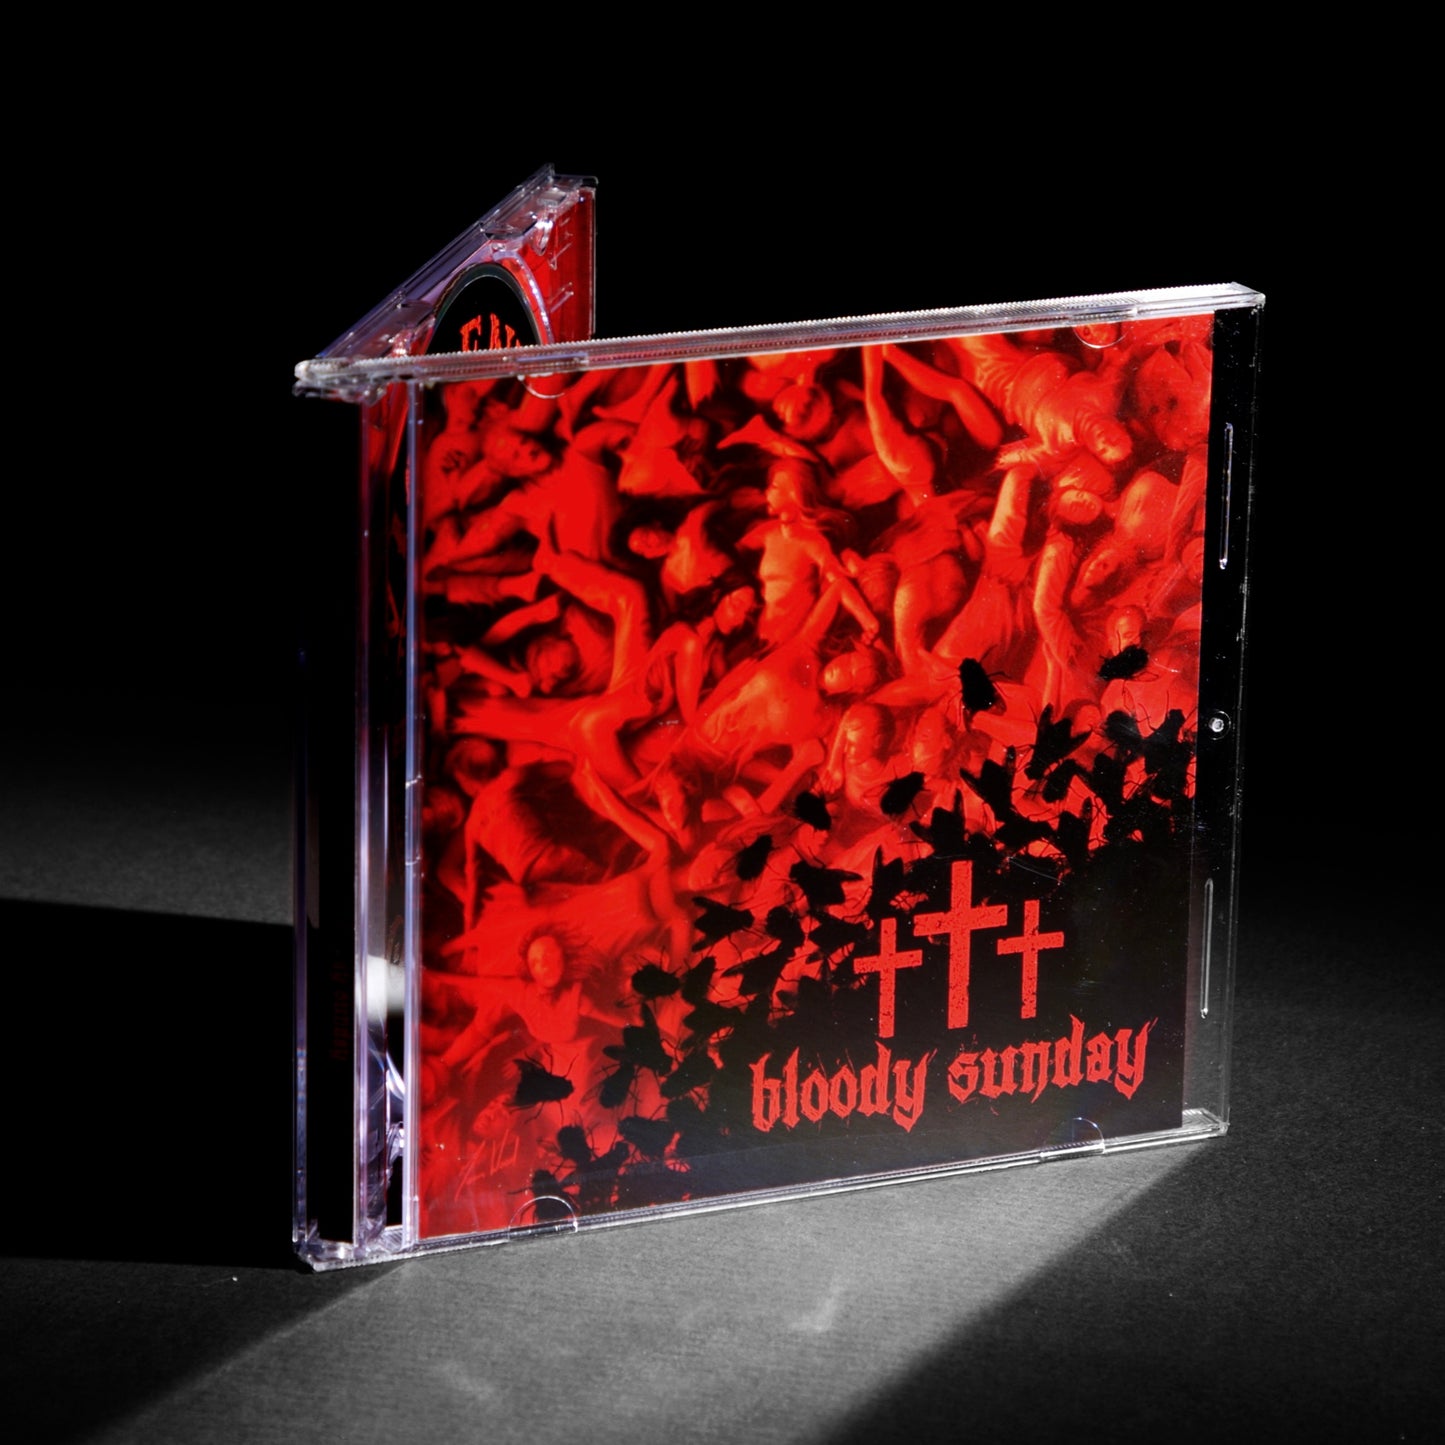 Violent J - Bloody Sunday Deluxe Collectors Edition